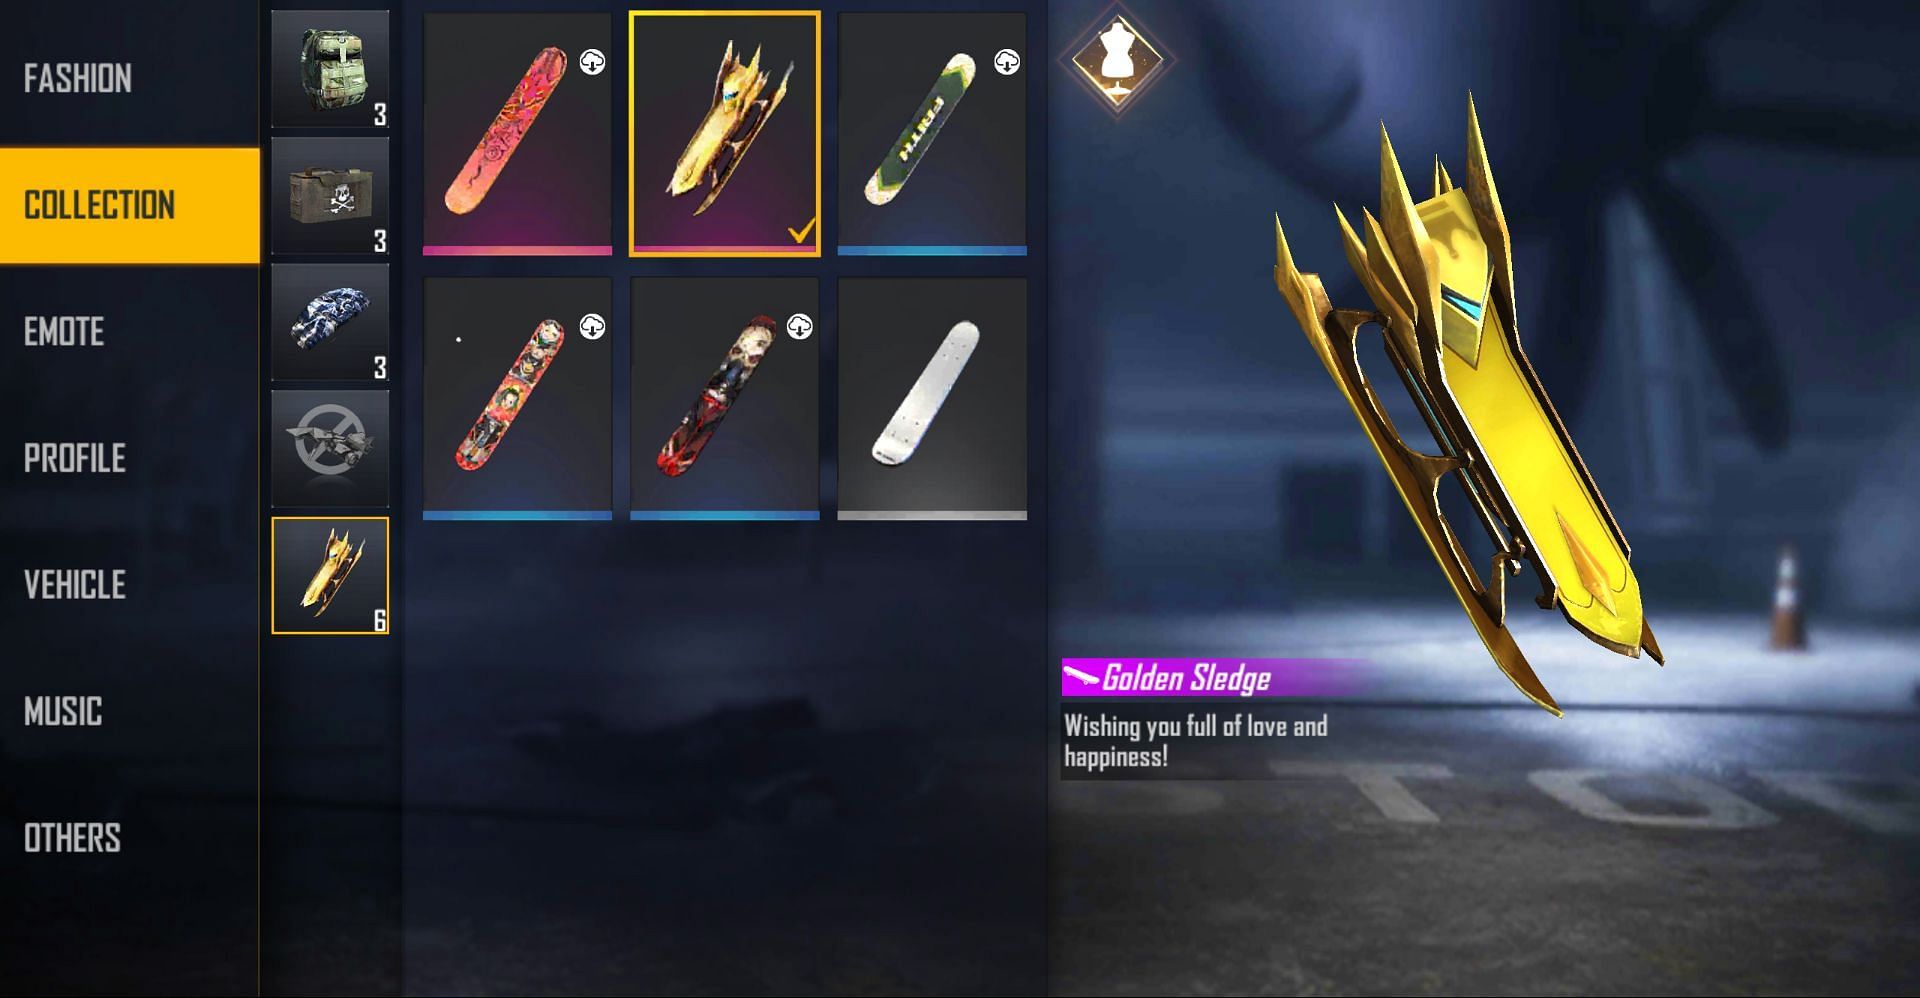 This is the Golden Sledge surfboard (Image via Garena)